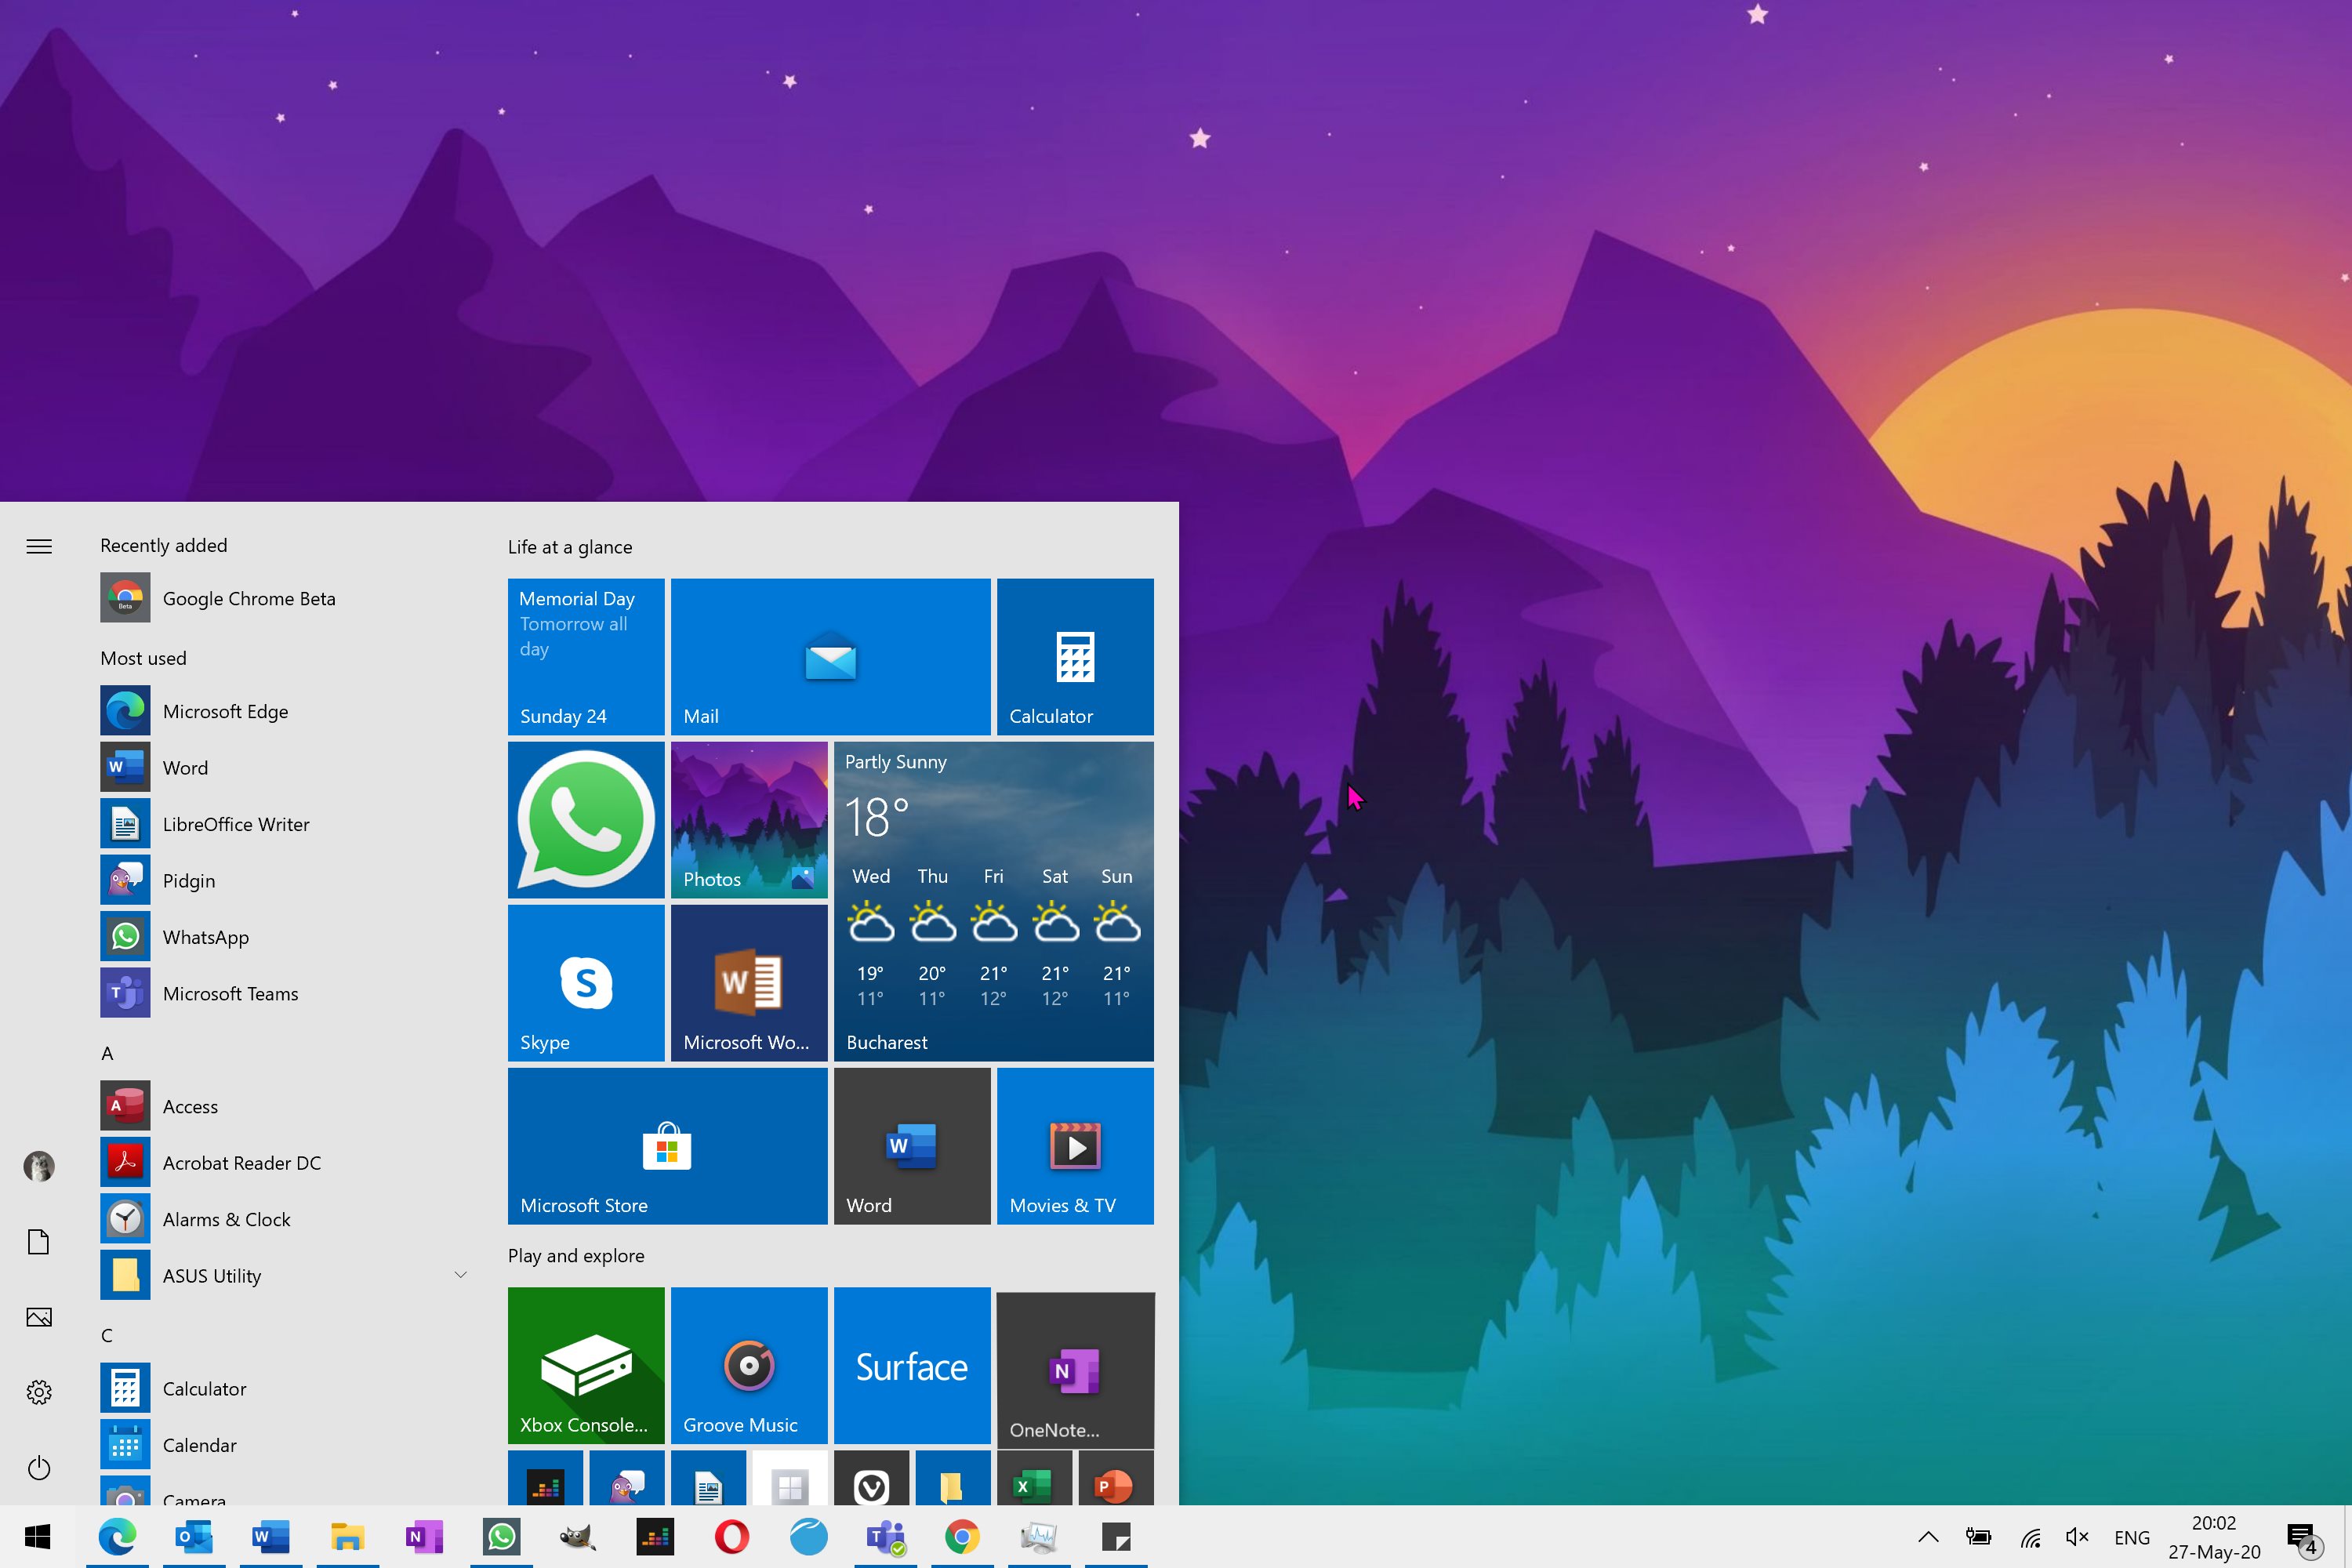 Windows 10 May 2020 Update should be released today